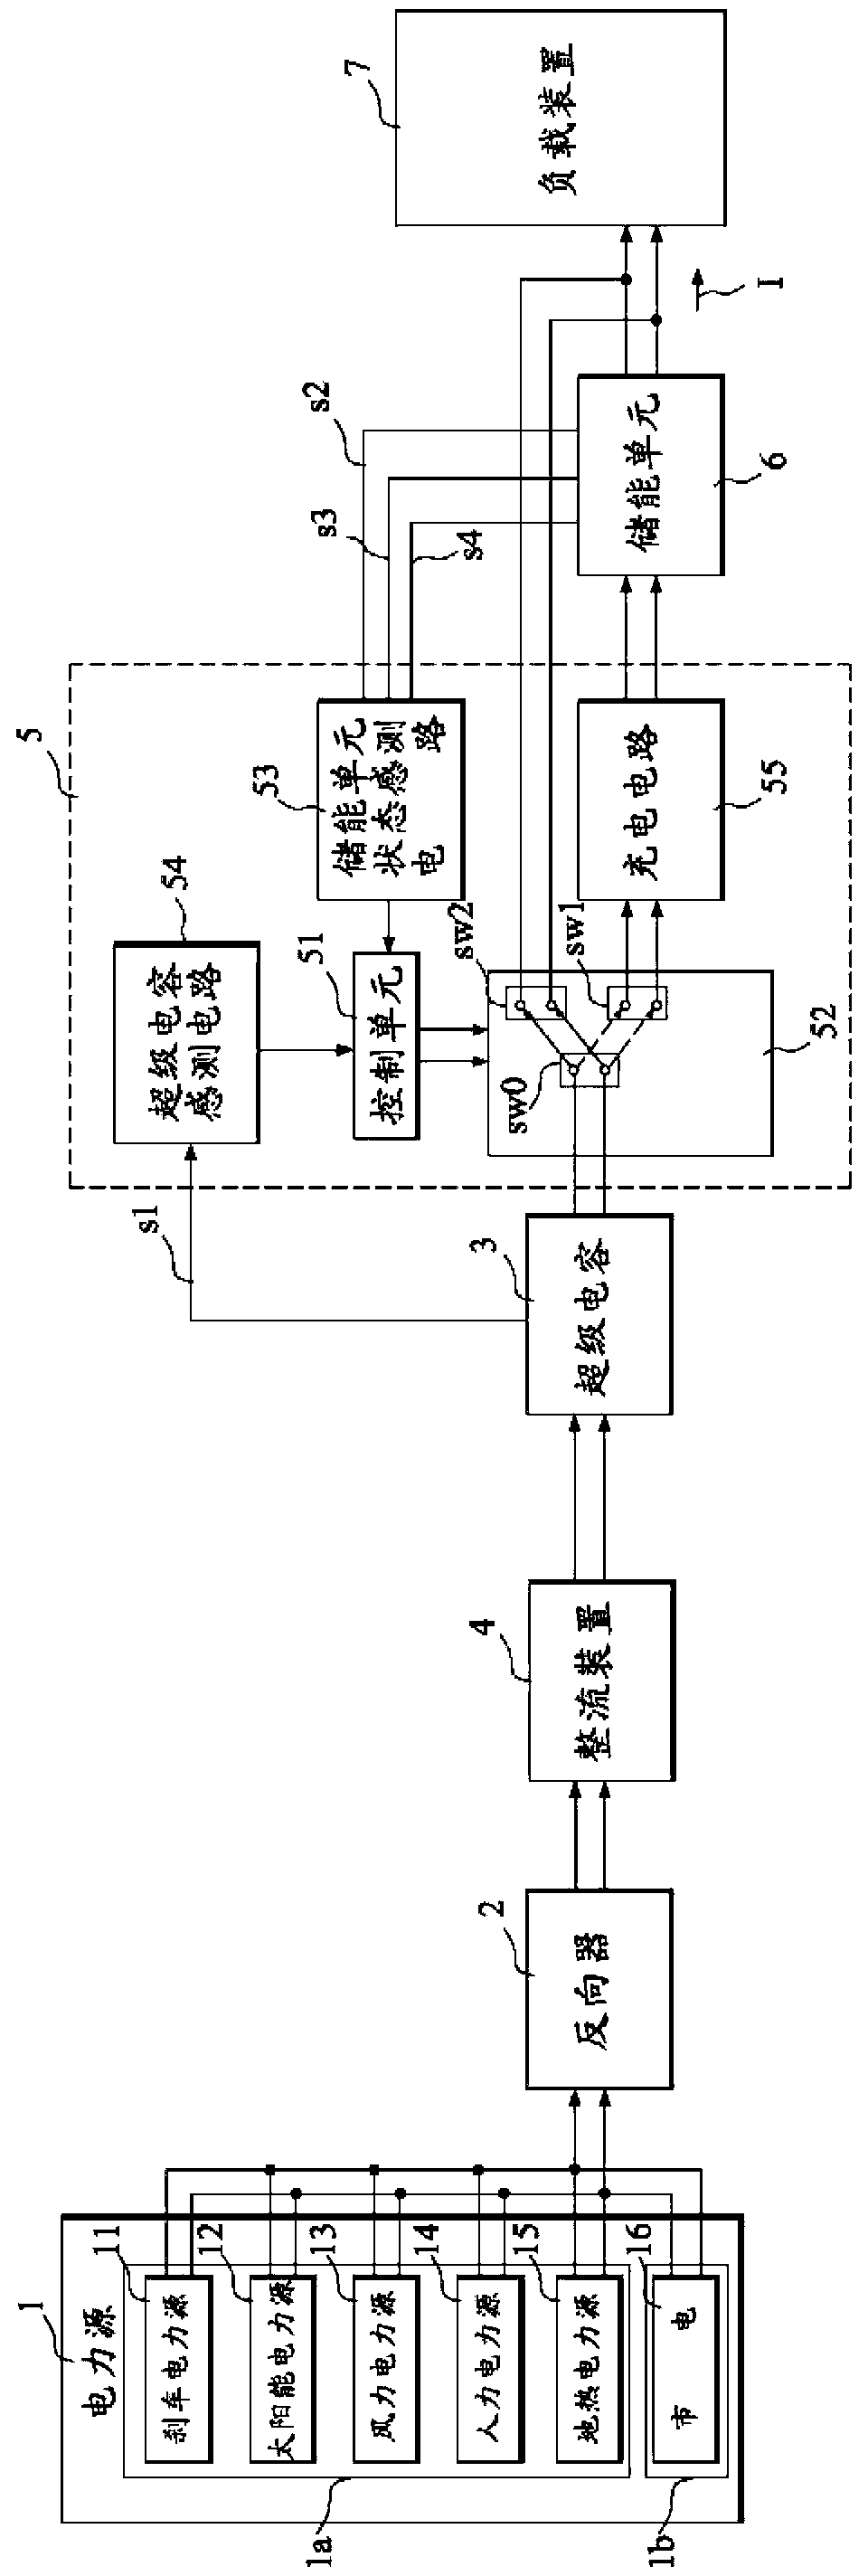 A charging and discharging control circuit for a super-capacitor and an energy storage unit and a method thereof